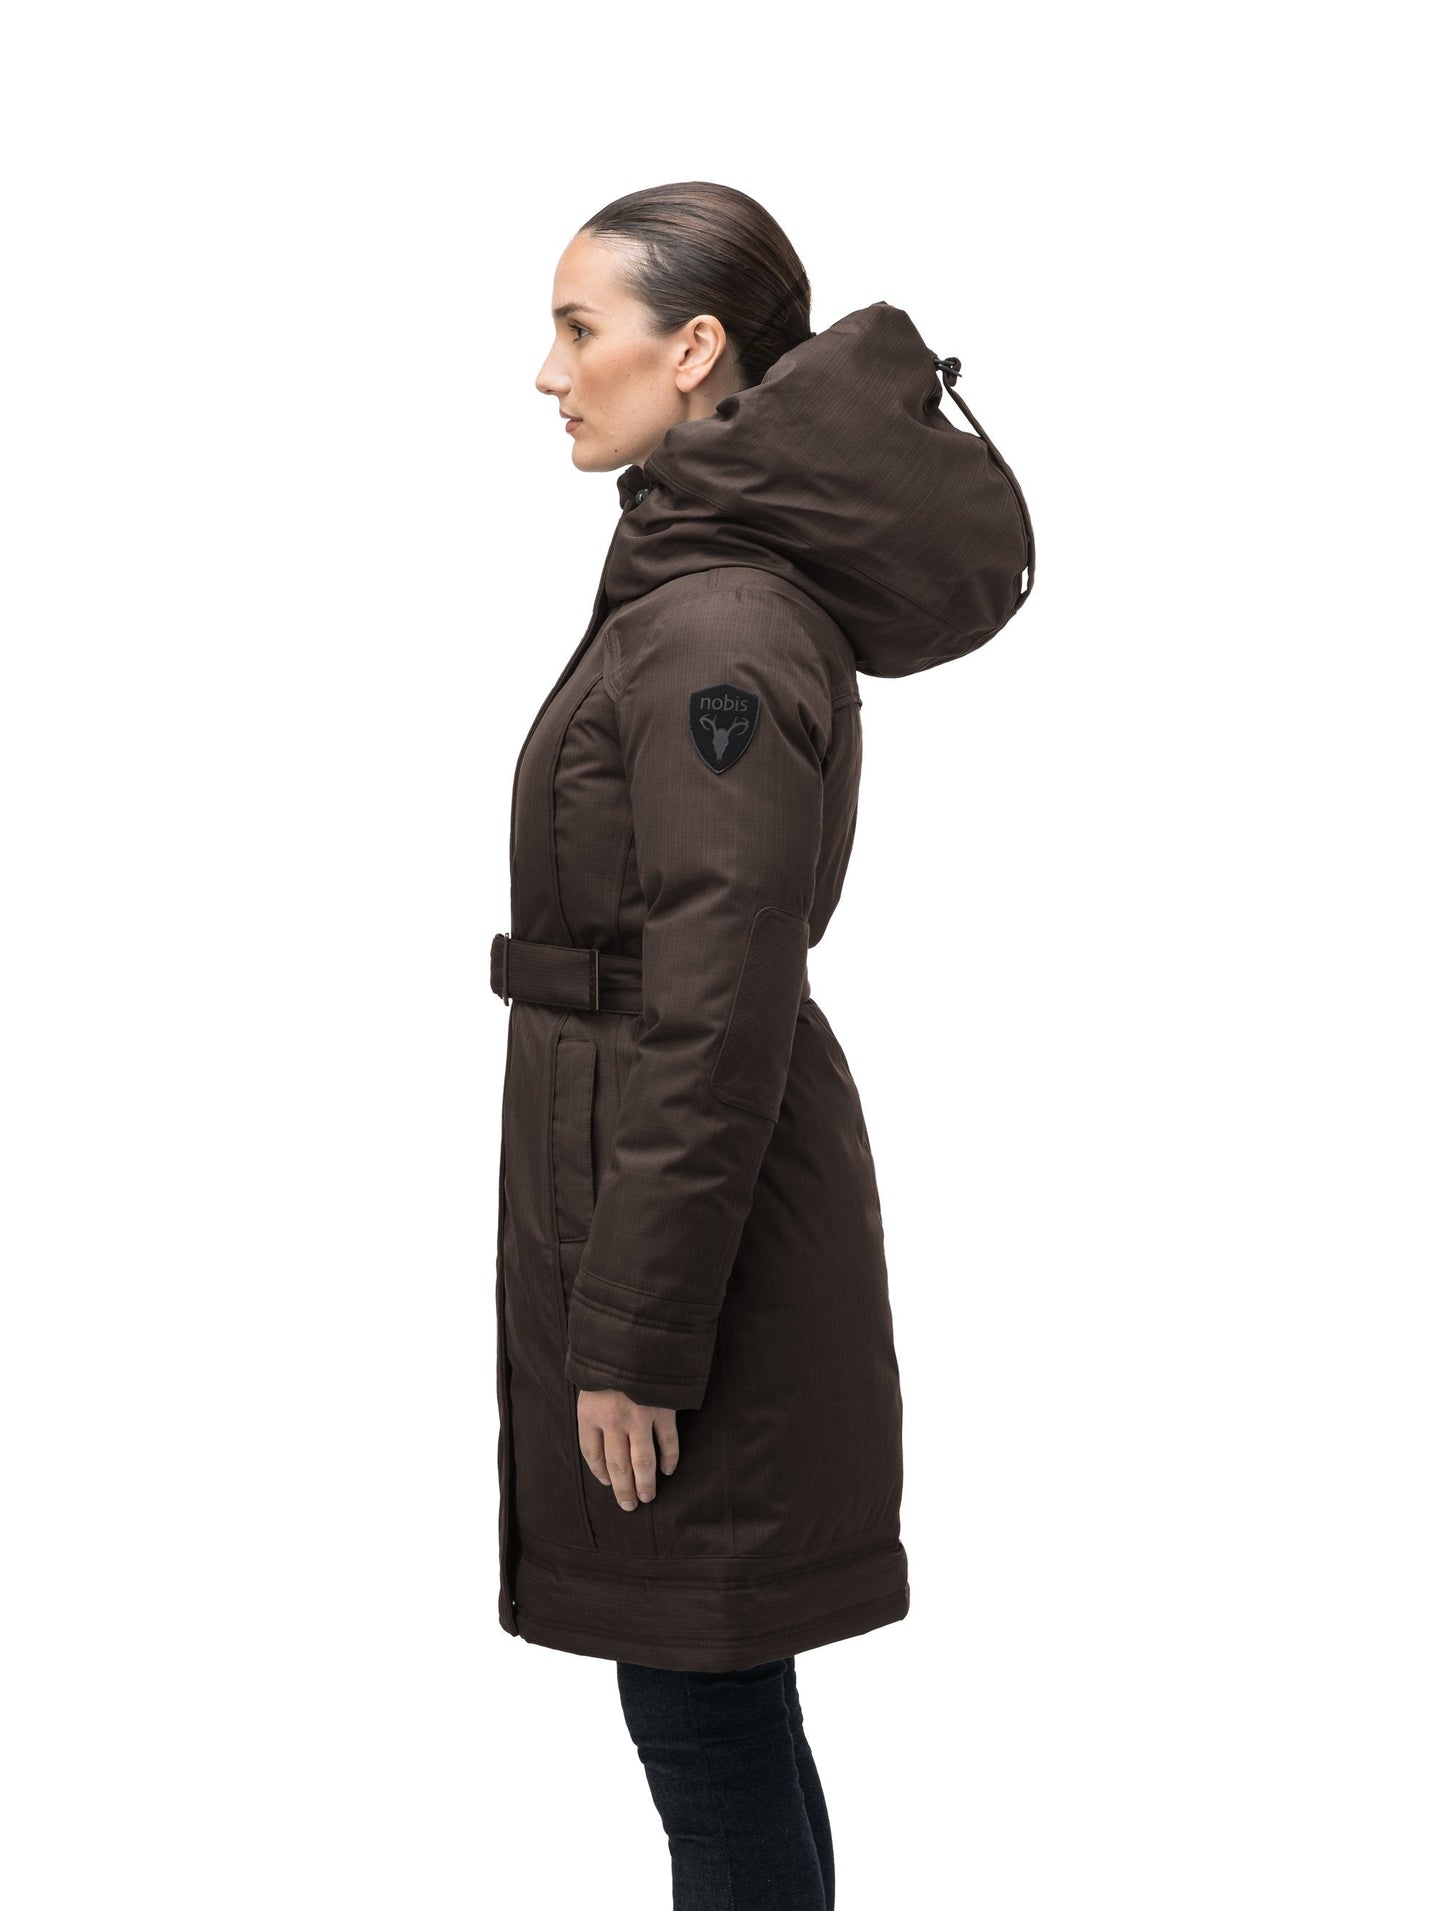 Women's Thigh length own parka with a furless oversized hood in CH Brown